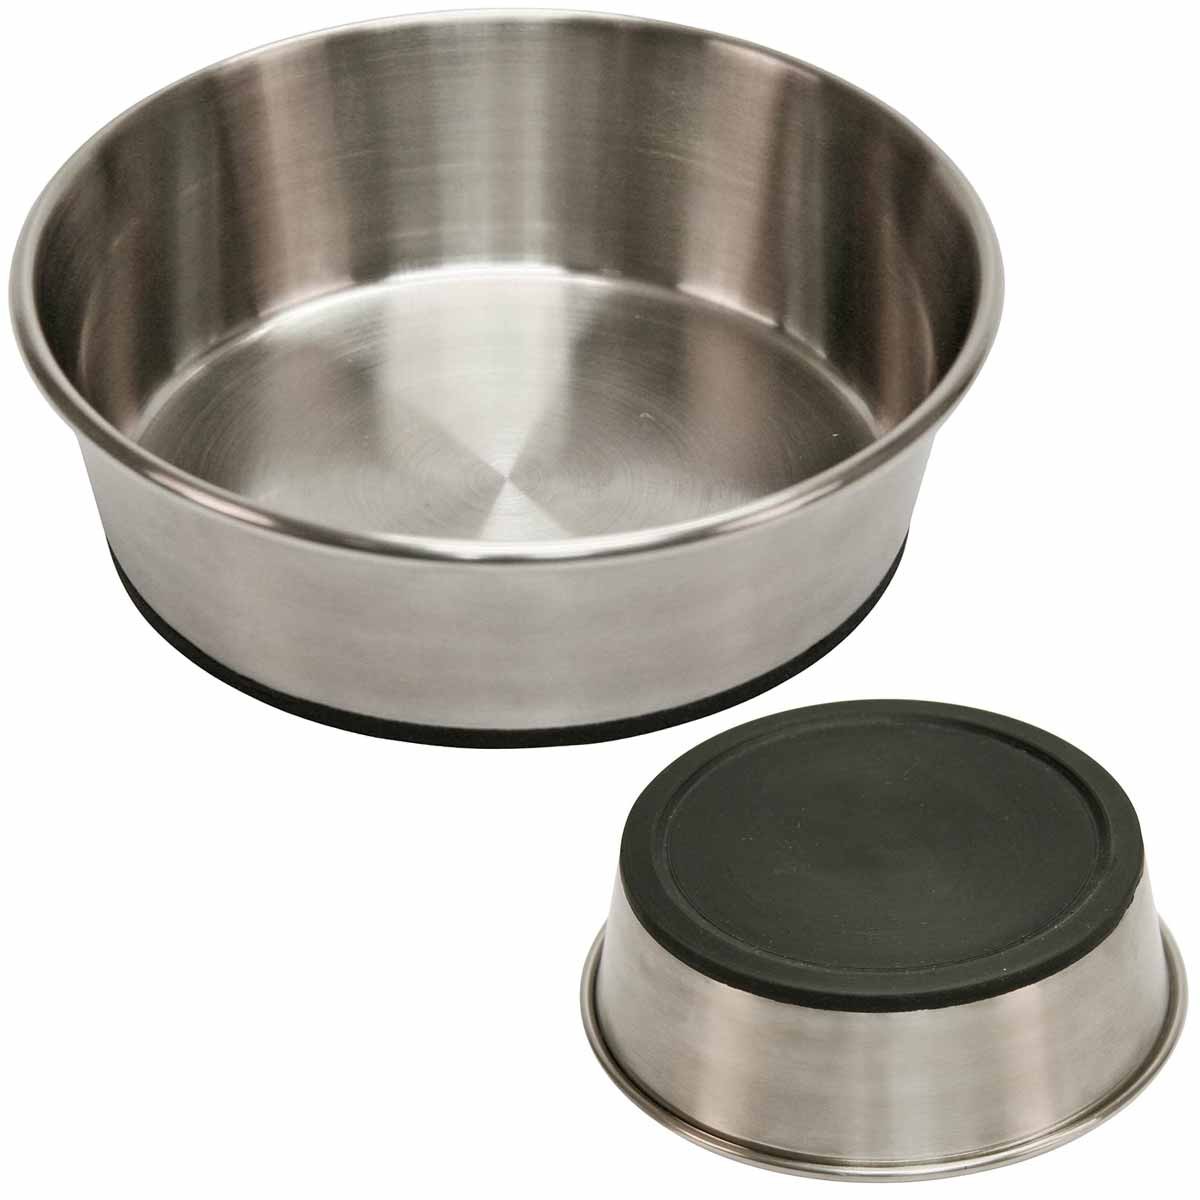 Stainless Steel Bowl 850 ml